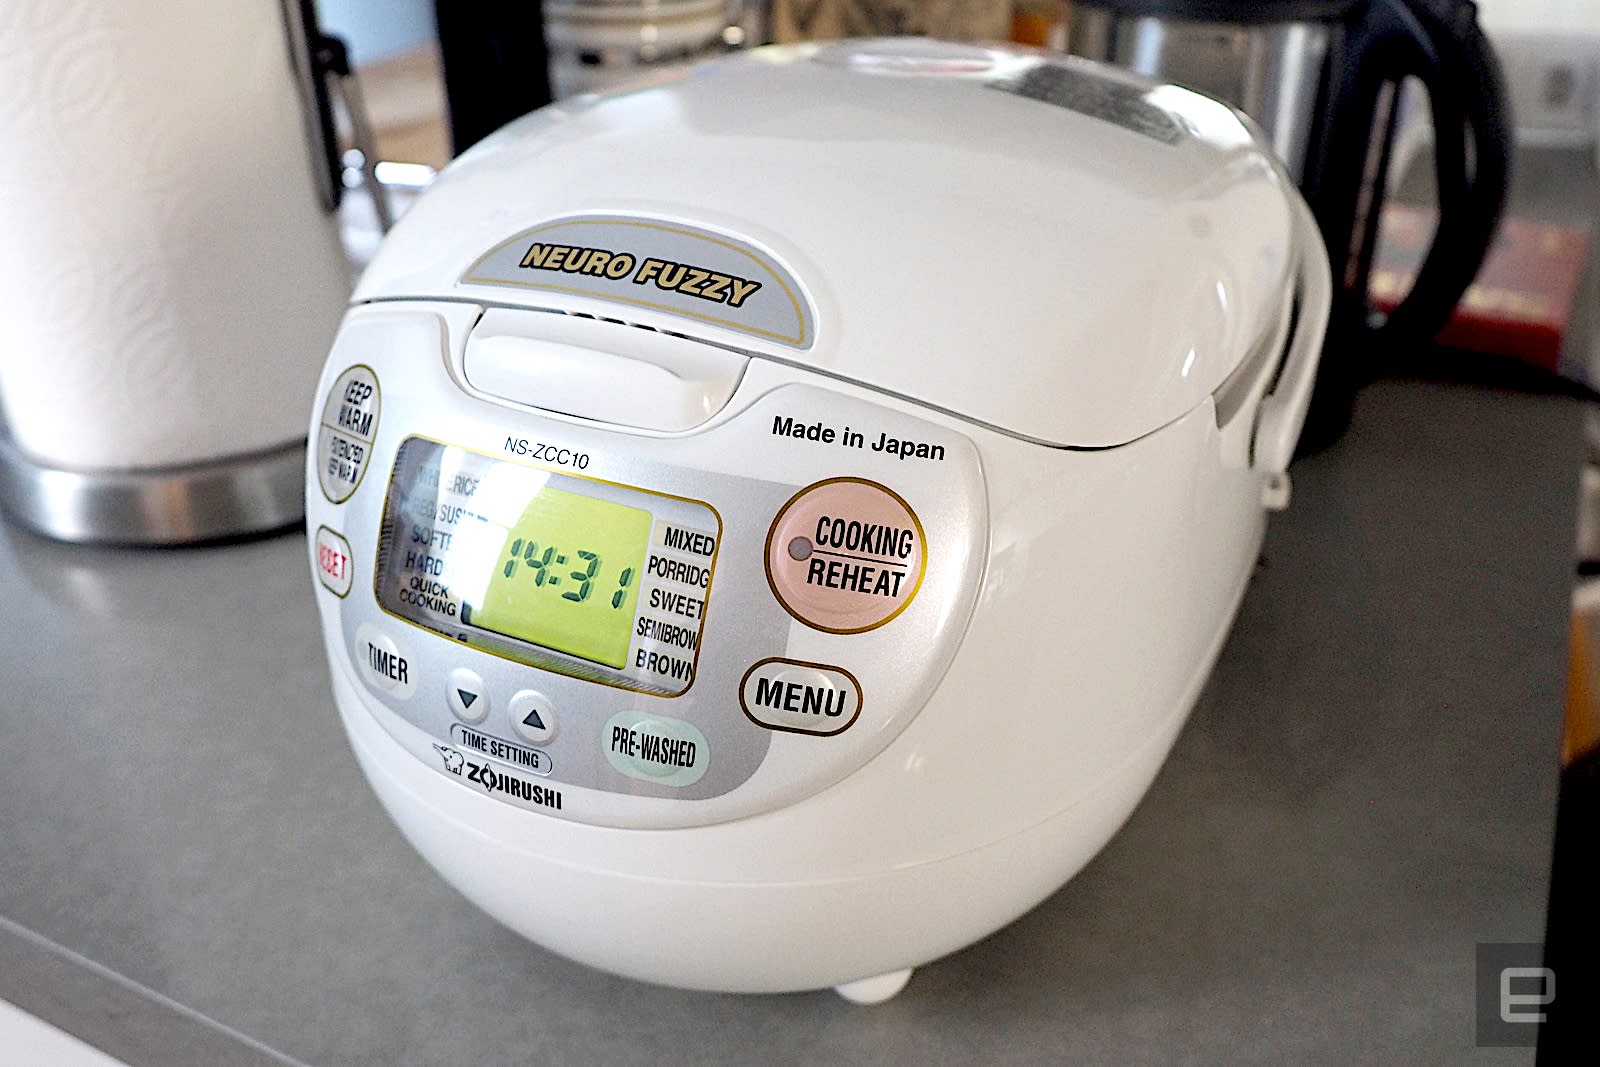 How To Use The Neuro Fuzzy Rice Cooker